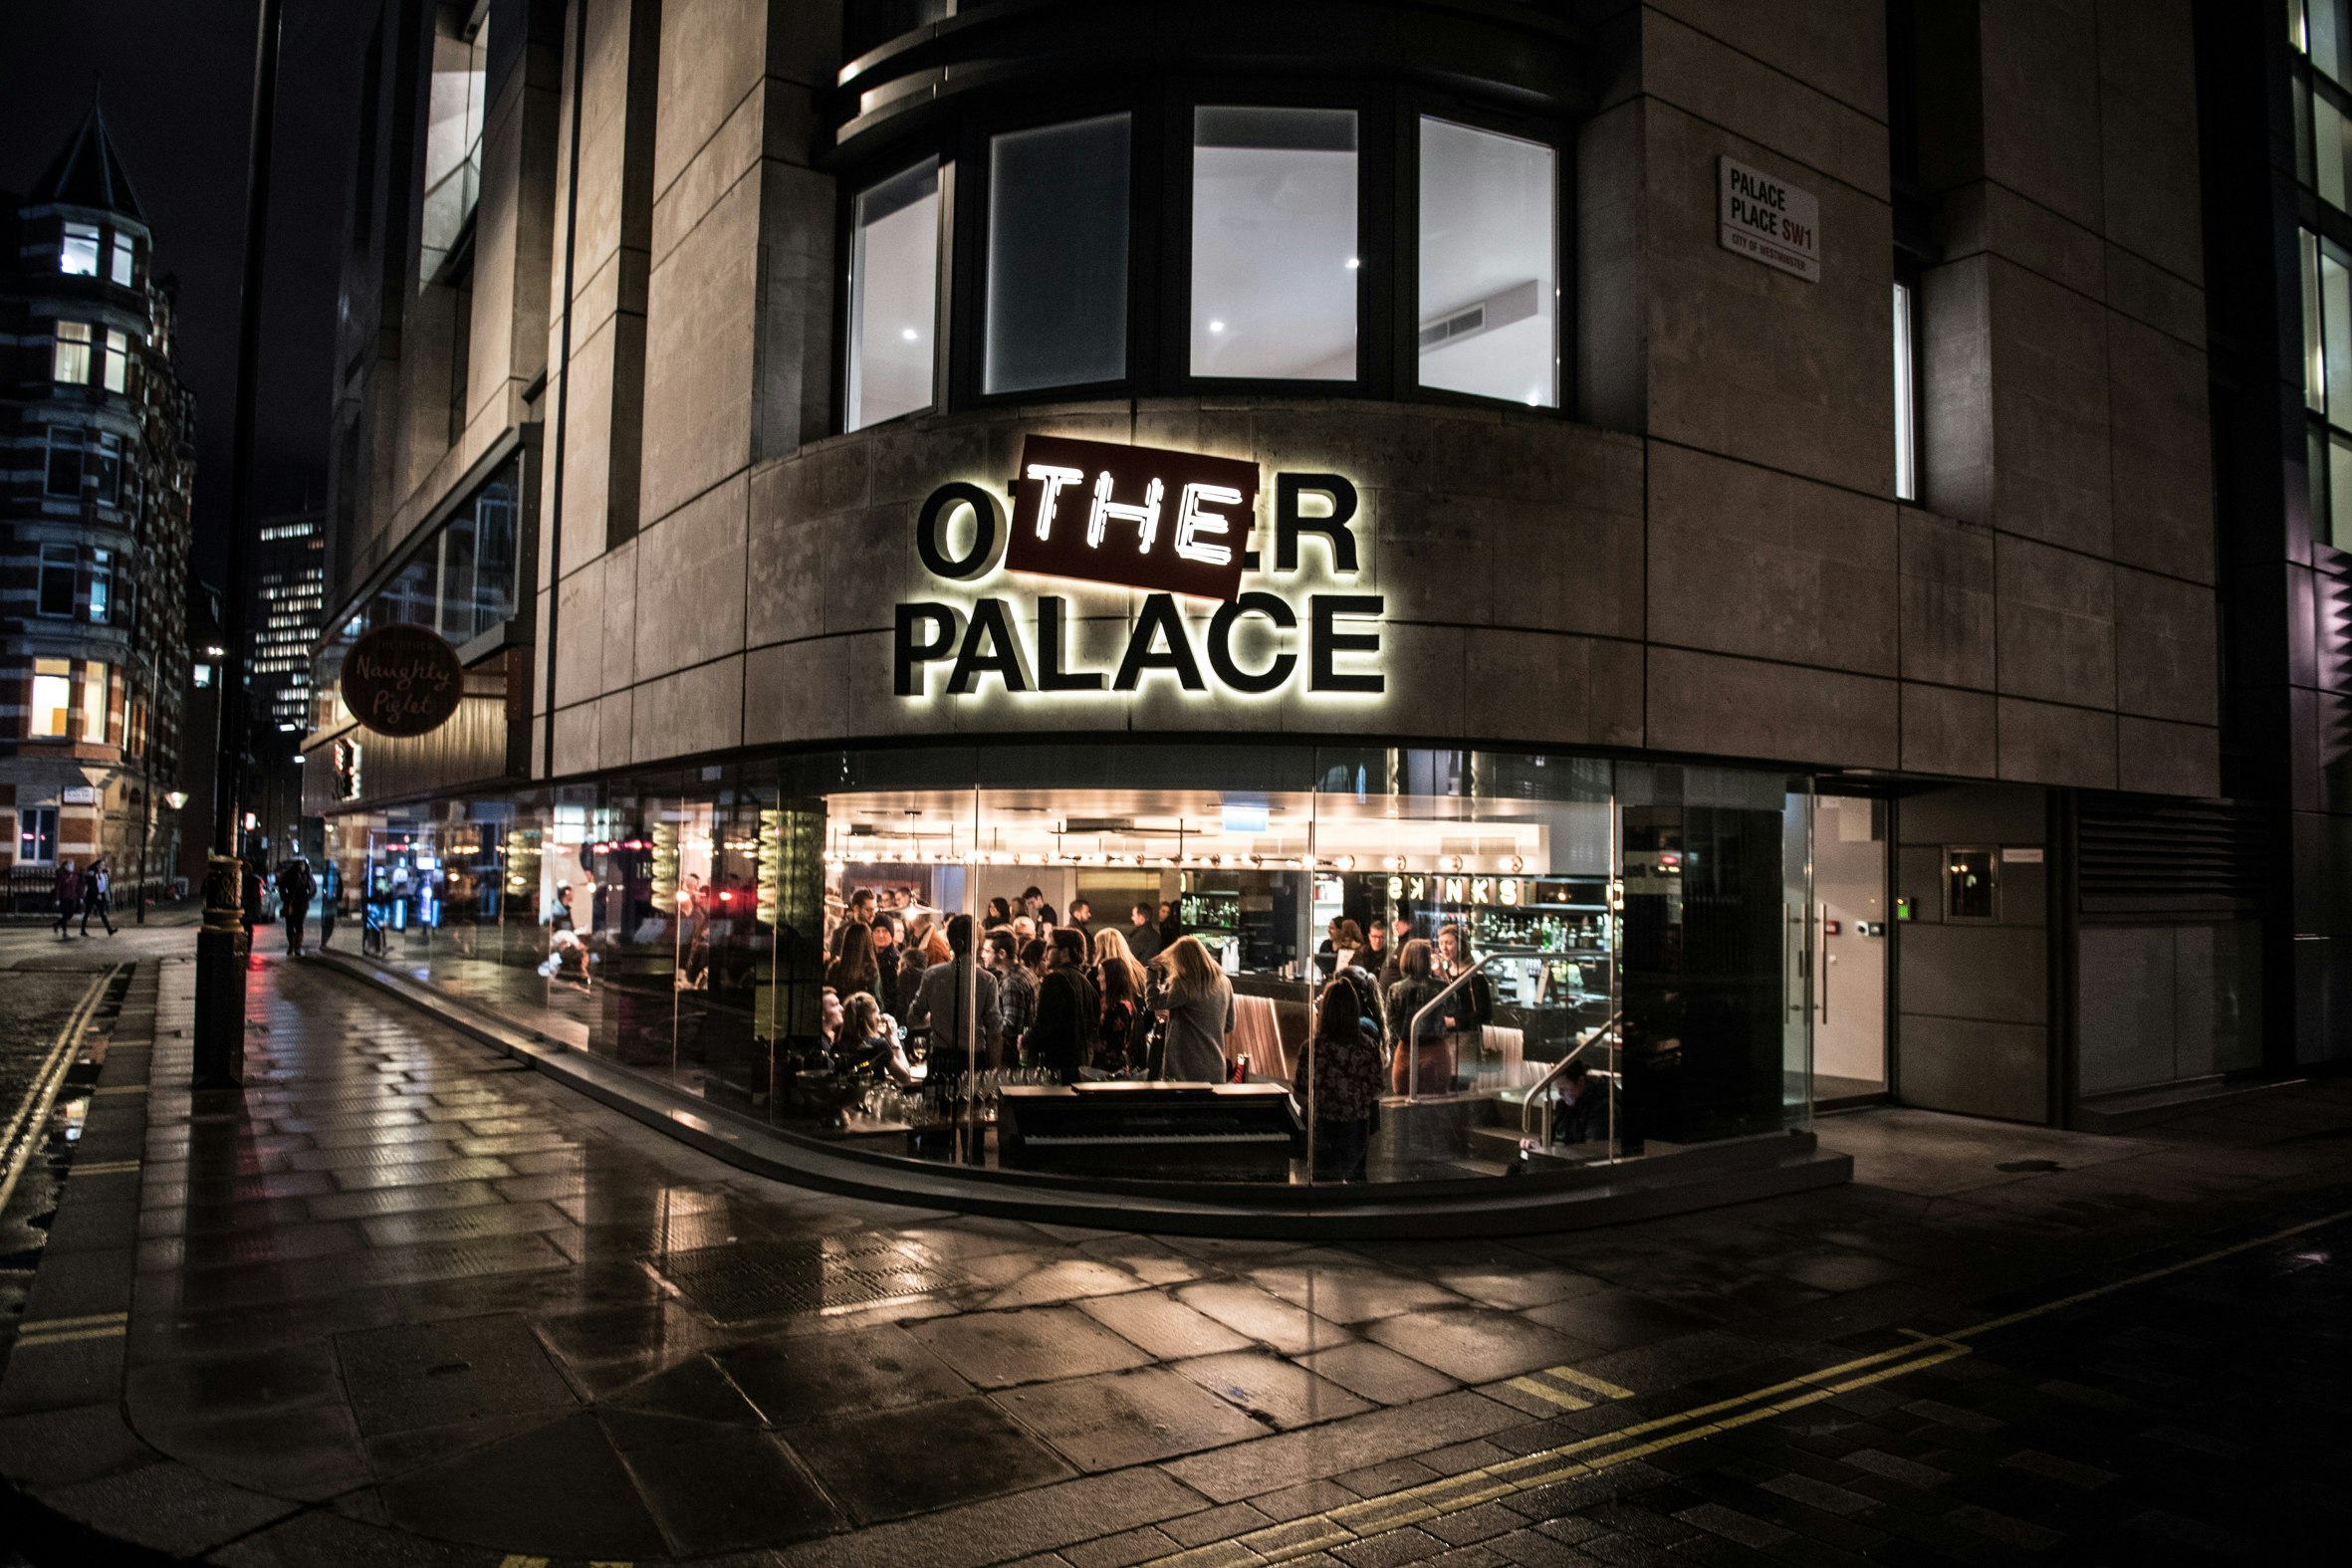 The Other Palace Theatre - The Theatre image 4